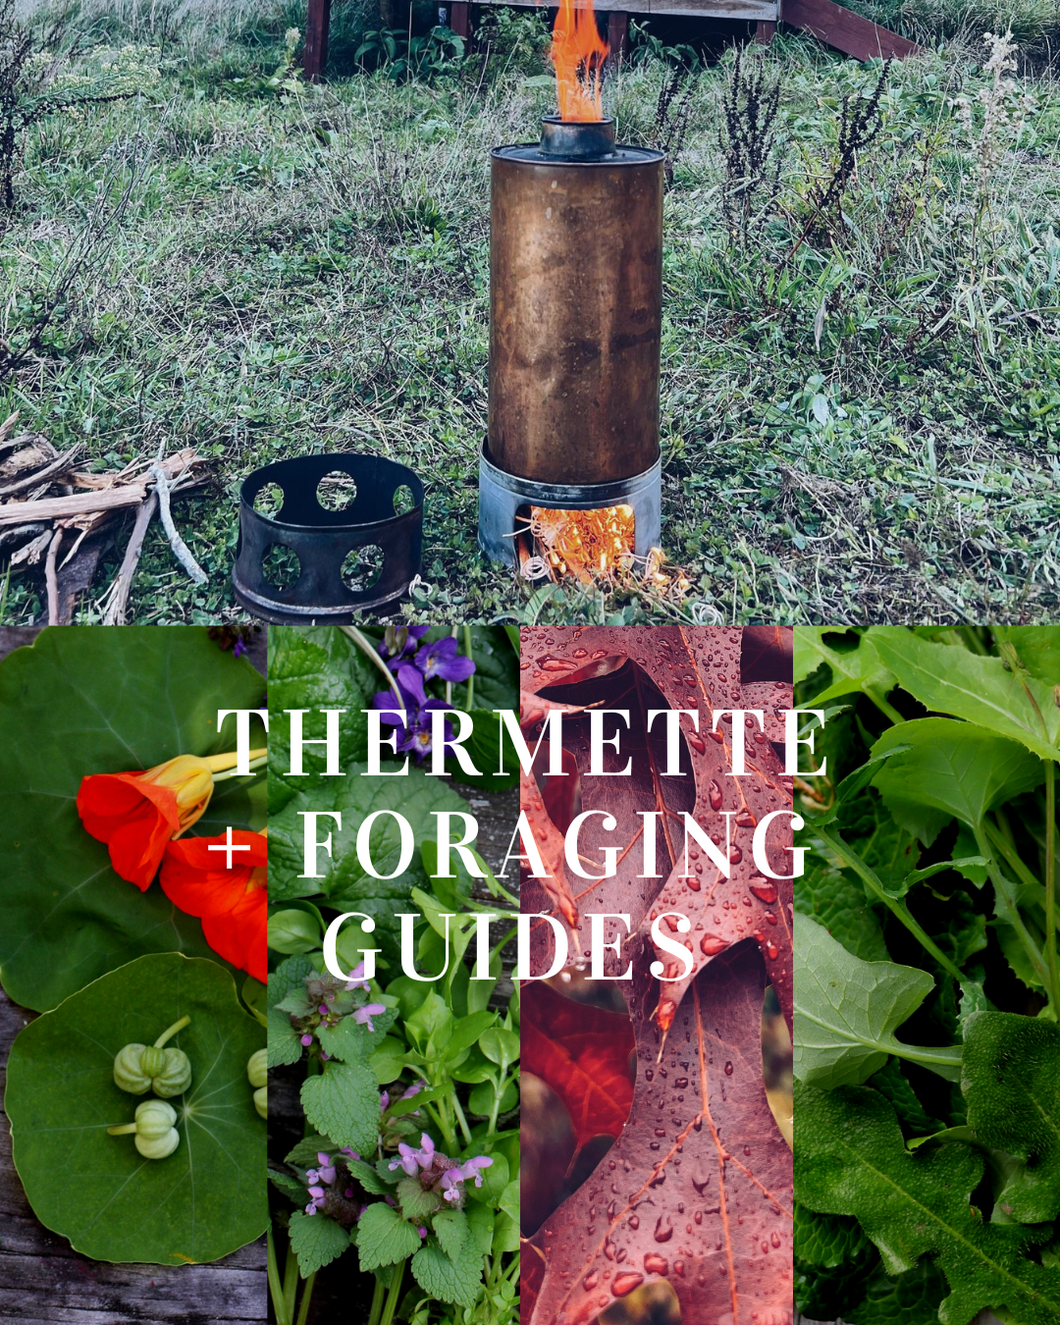 Combo = Copper Thermette + Foraging Guides Bundle of 4 books